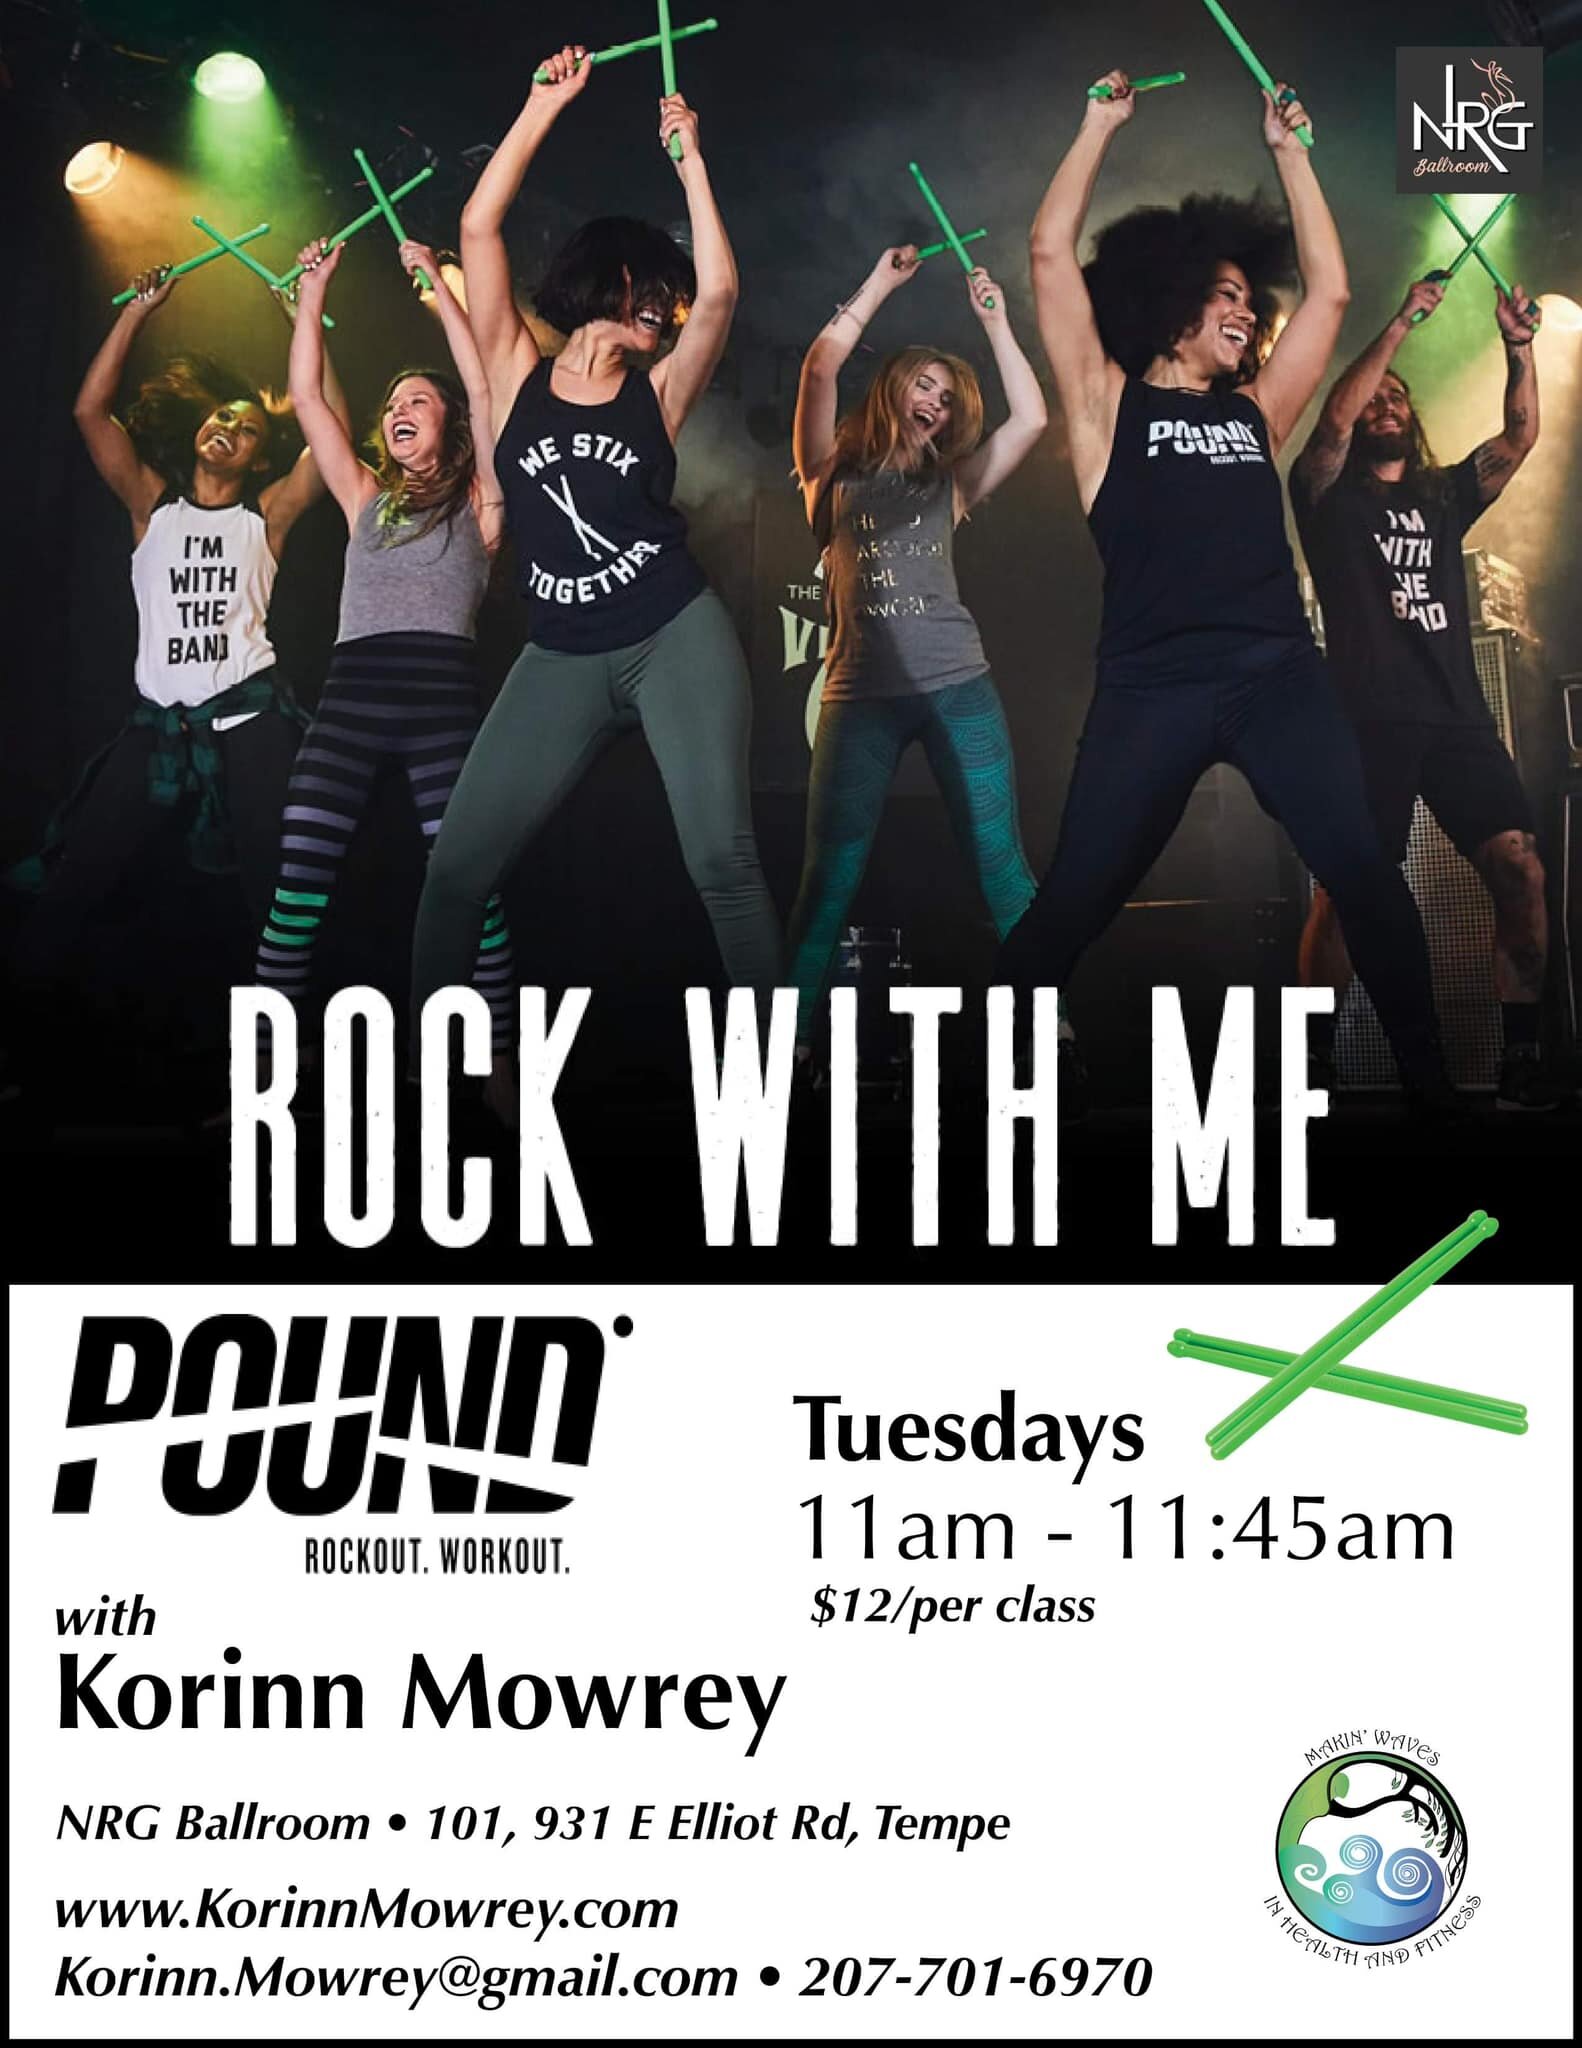 Join me tomorrow for another great Pound class at NRG!